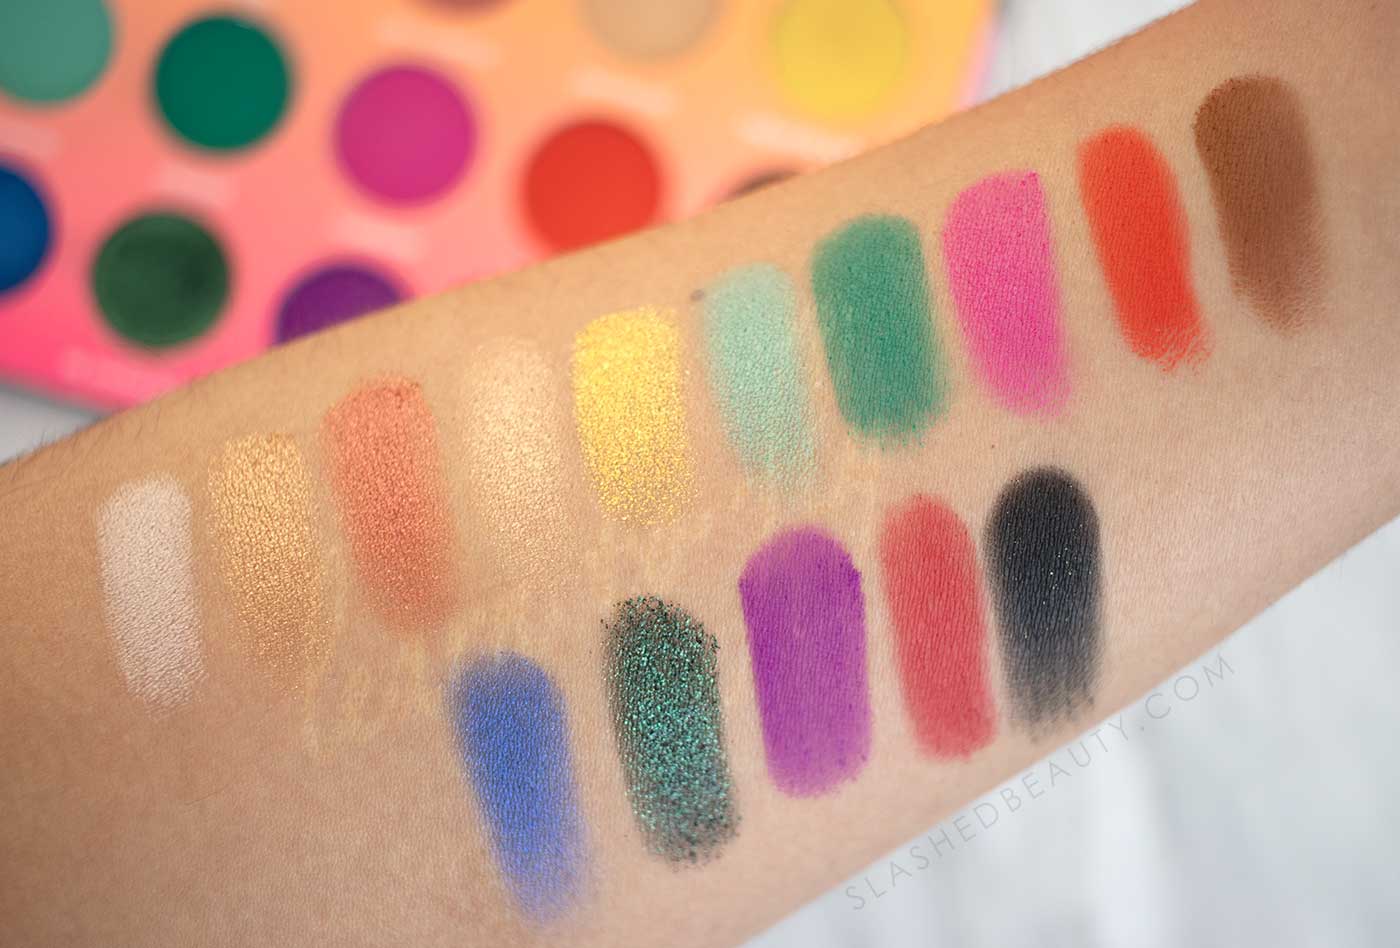 Wet n Wild Bretman Rock Shadow Palette Review & Swatches | Slashed Beauty